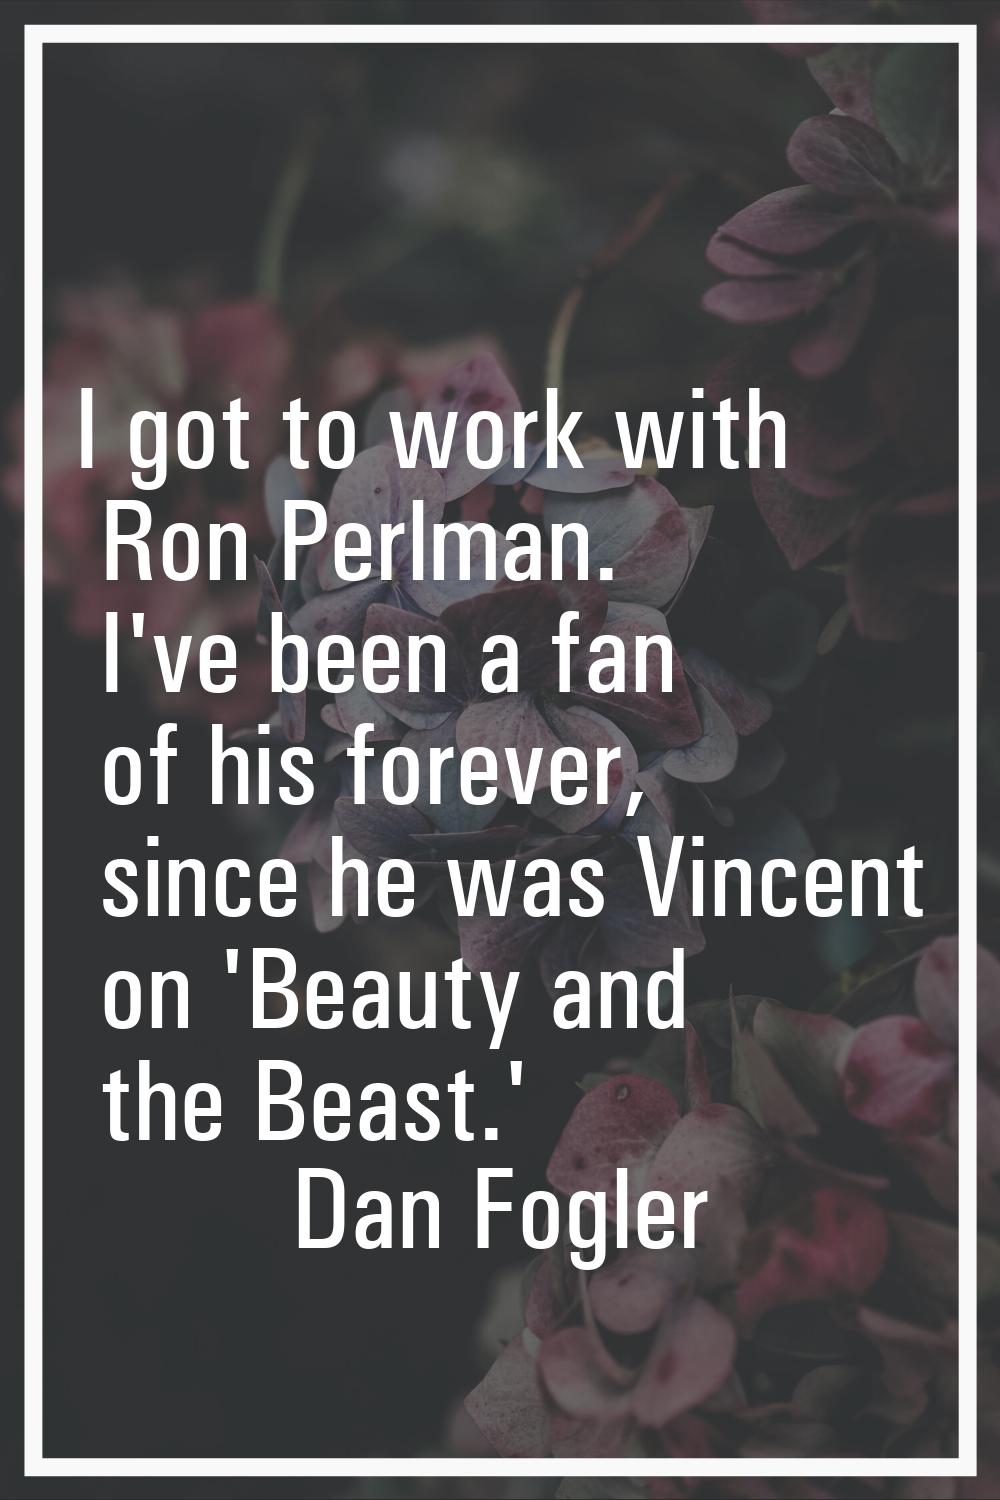 I got to work with Ron Perlman. I've been a fan of his forever, since he was Vincent on 'Beauty and